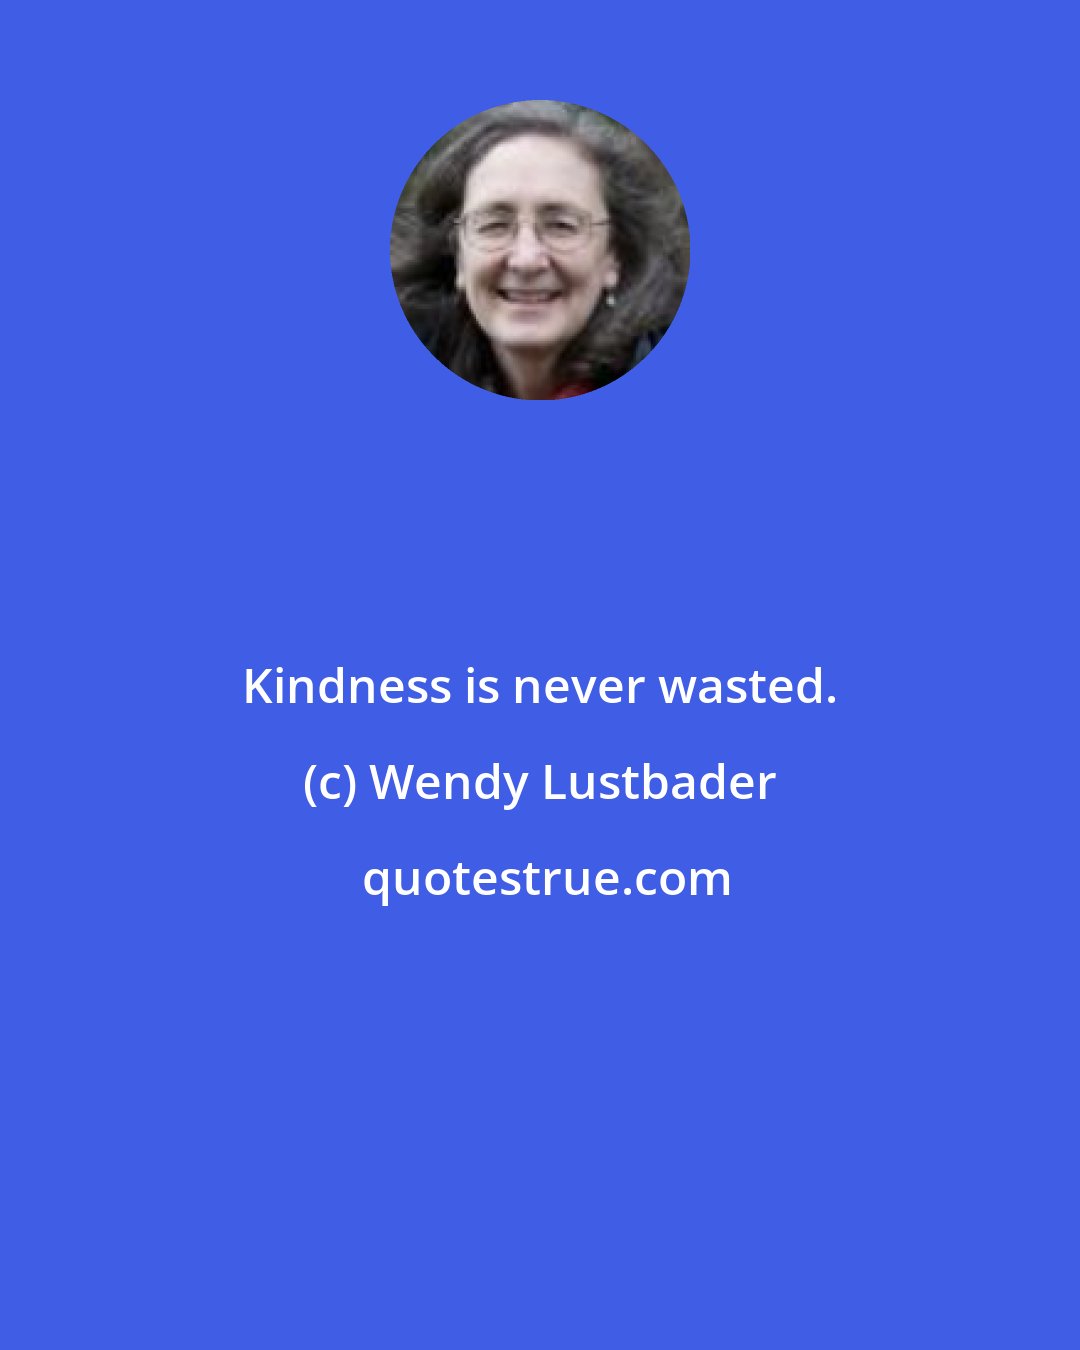 Wendy Lustbader: Kindness is never wasted.